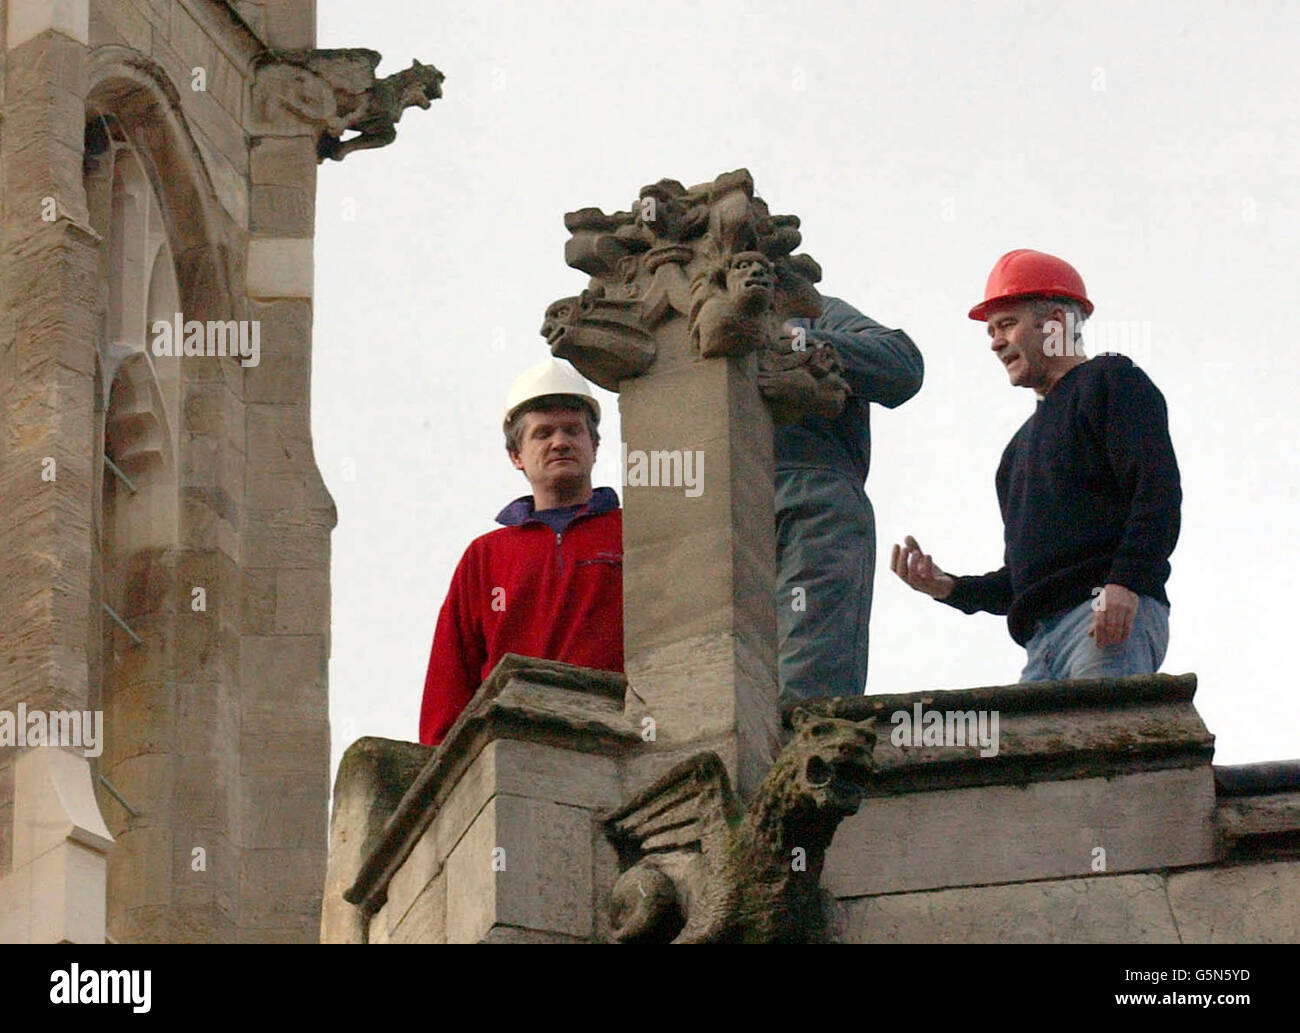 Workmen inspect the base of a column at All Saints Church in York, after a piece of masonry fell from the roof during gale force winds in the city last night, killing a woman who was walking undernearth. Stock Photo